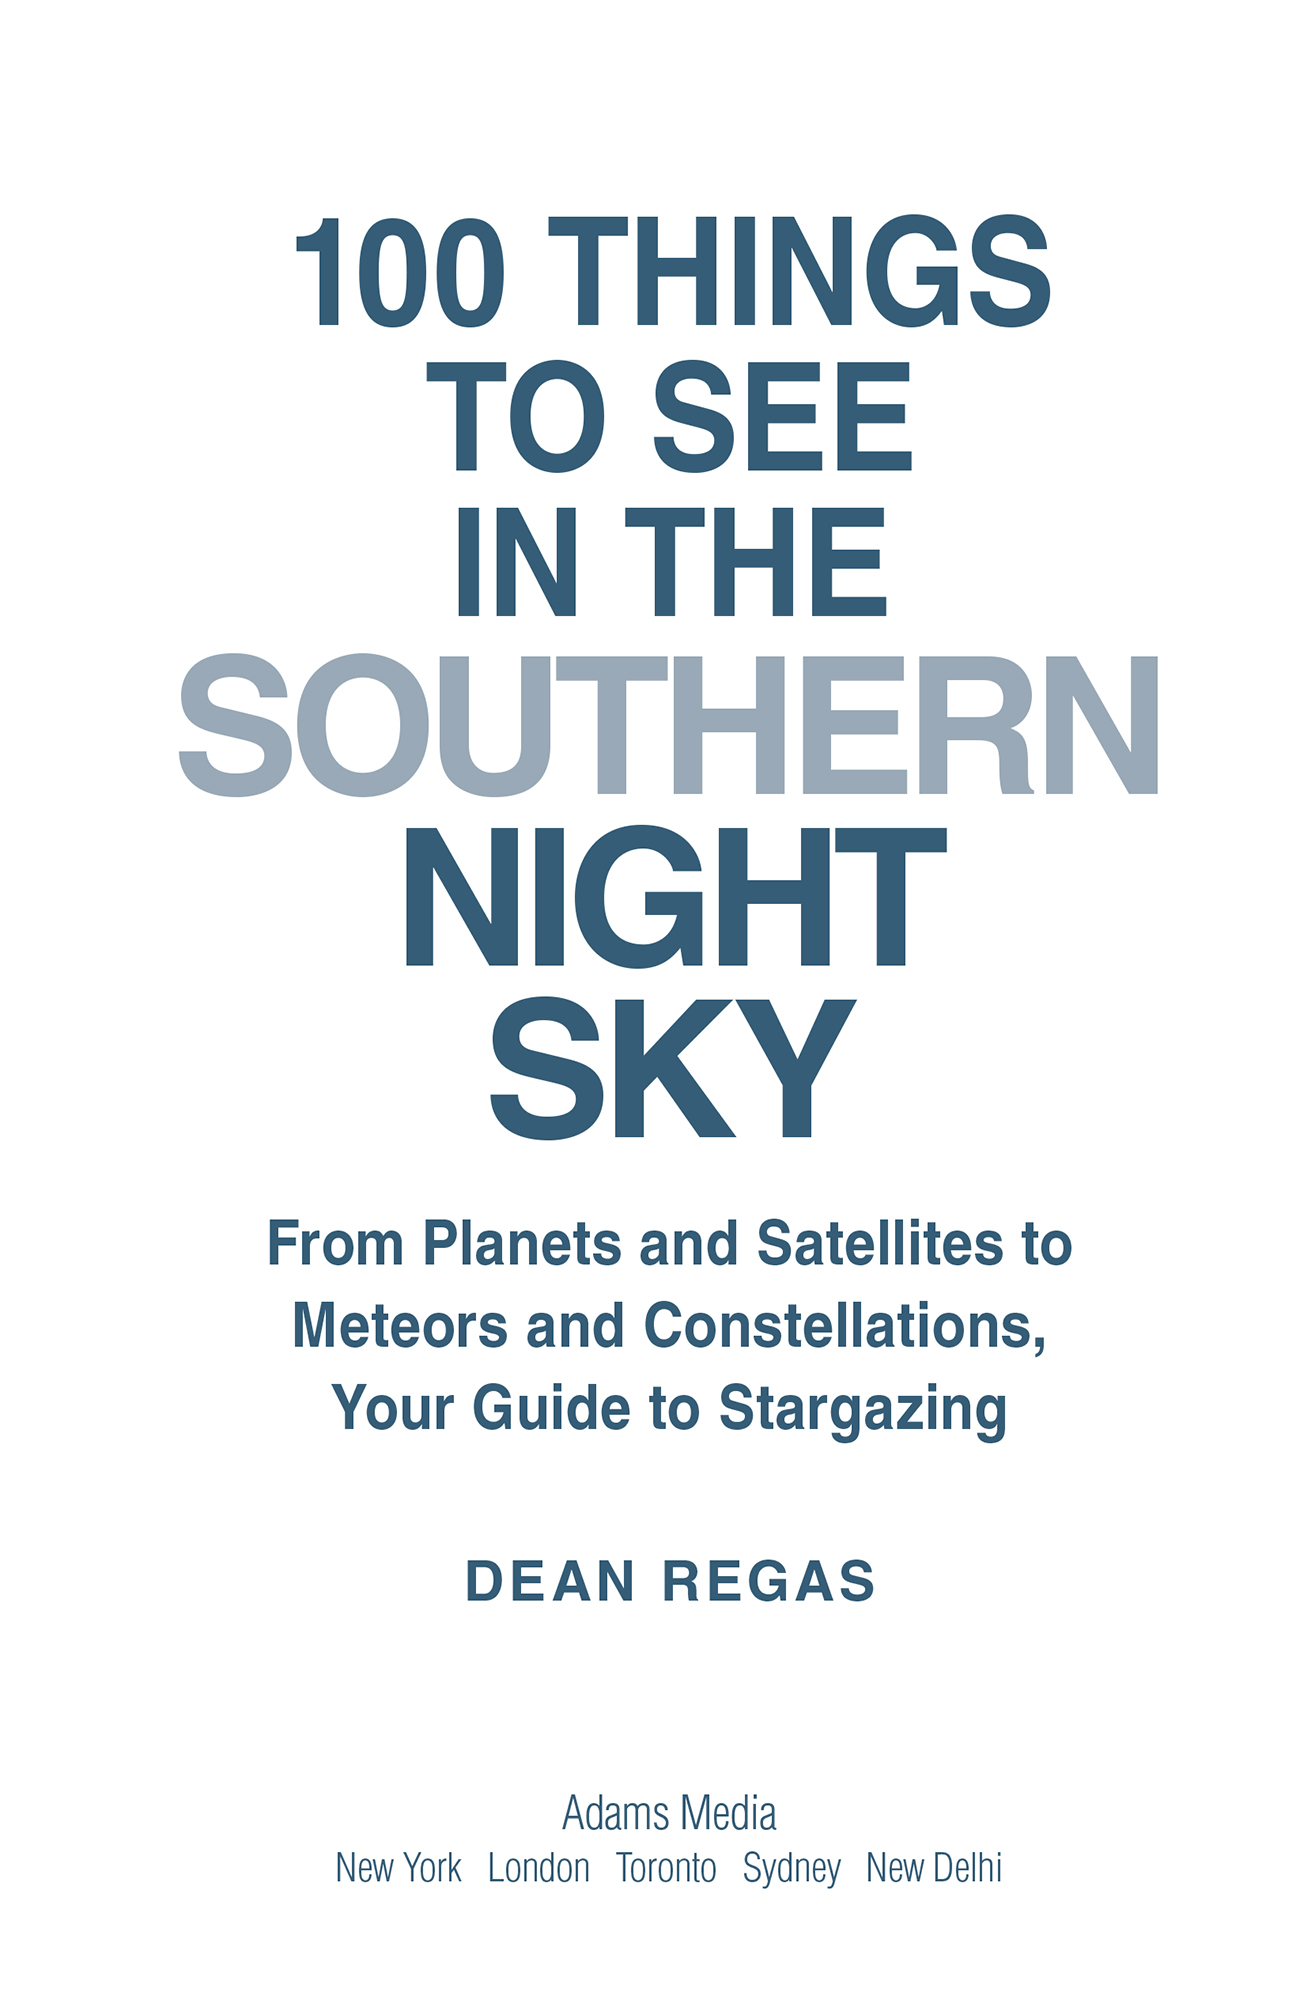 100 Things to See in the Southern Night Sky From Planets and Satellites to Meteors and Constellations Your Guide to Stargazing - image 2